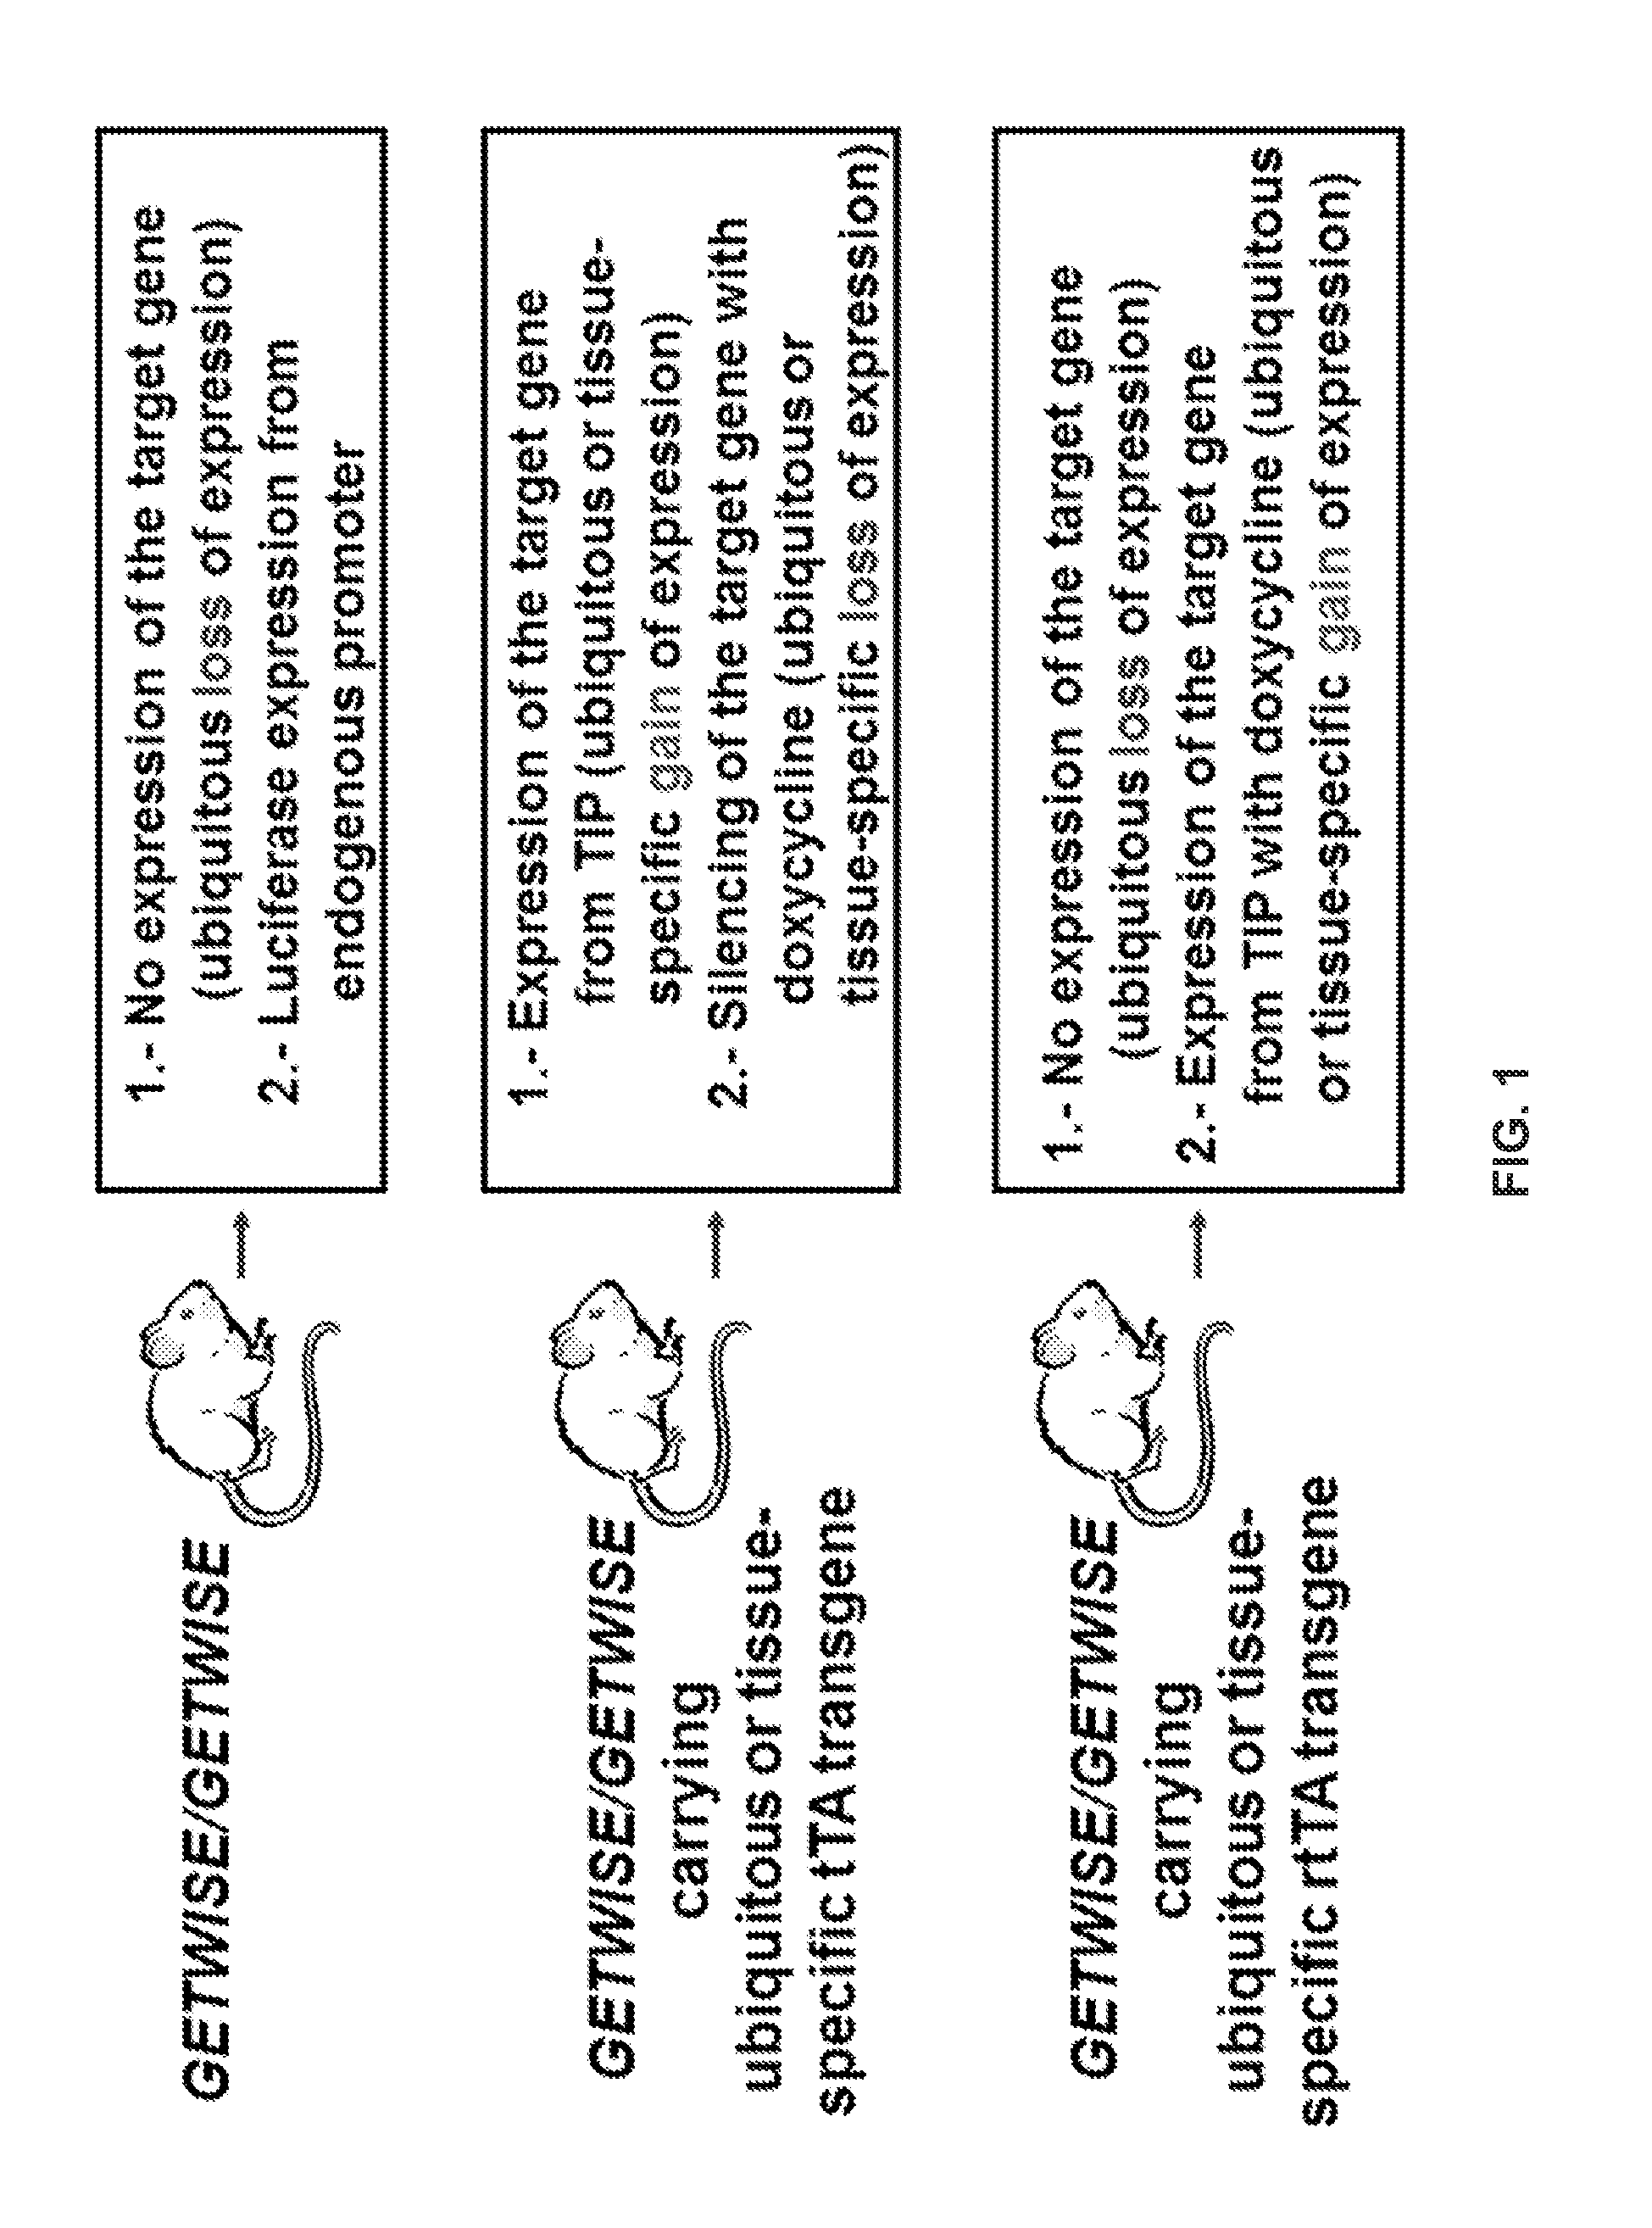 Methods and Vectors for Gene Targeting With Inducible Specific Expression